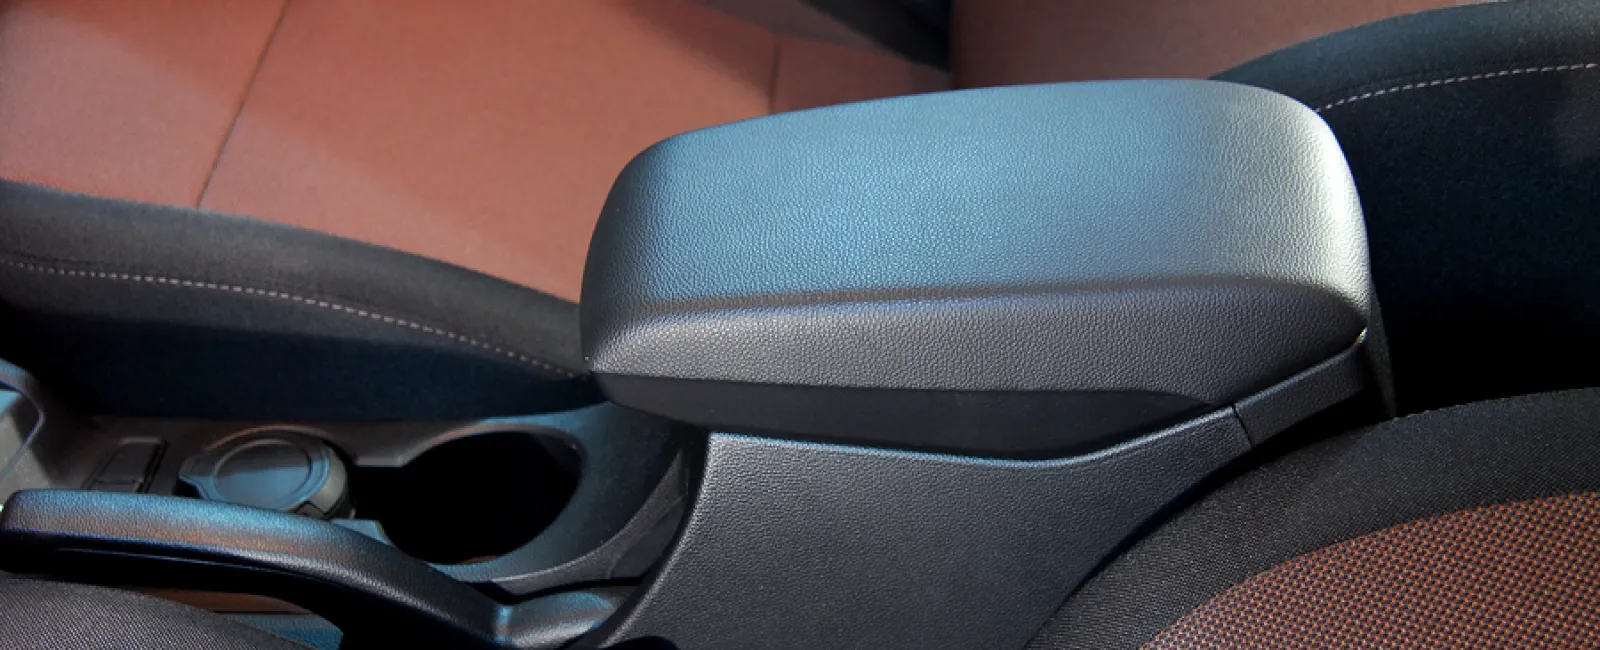 Clean leather car seat: you are working on outdated info that misleads